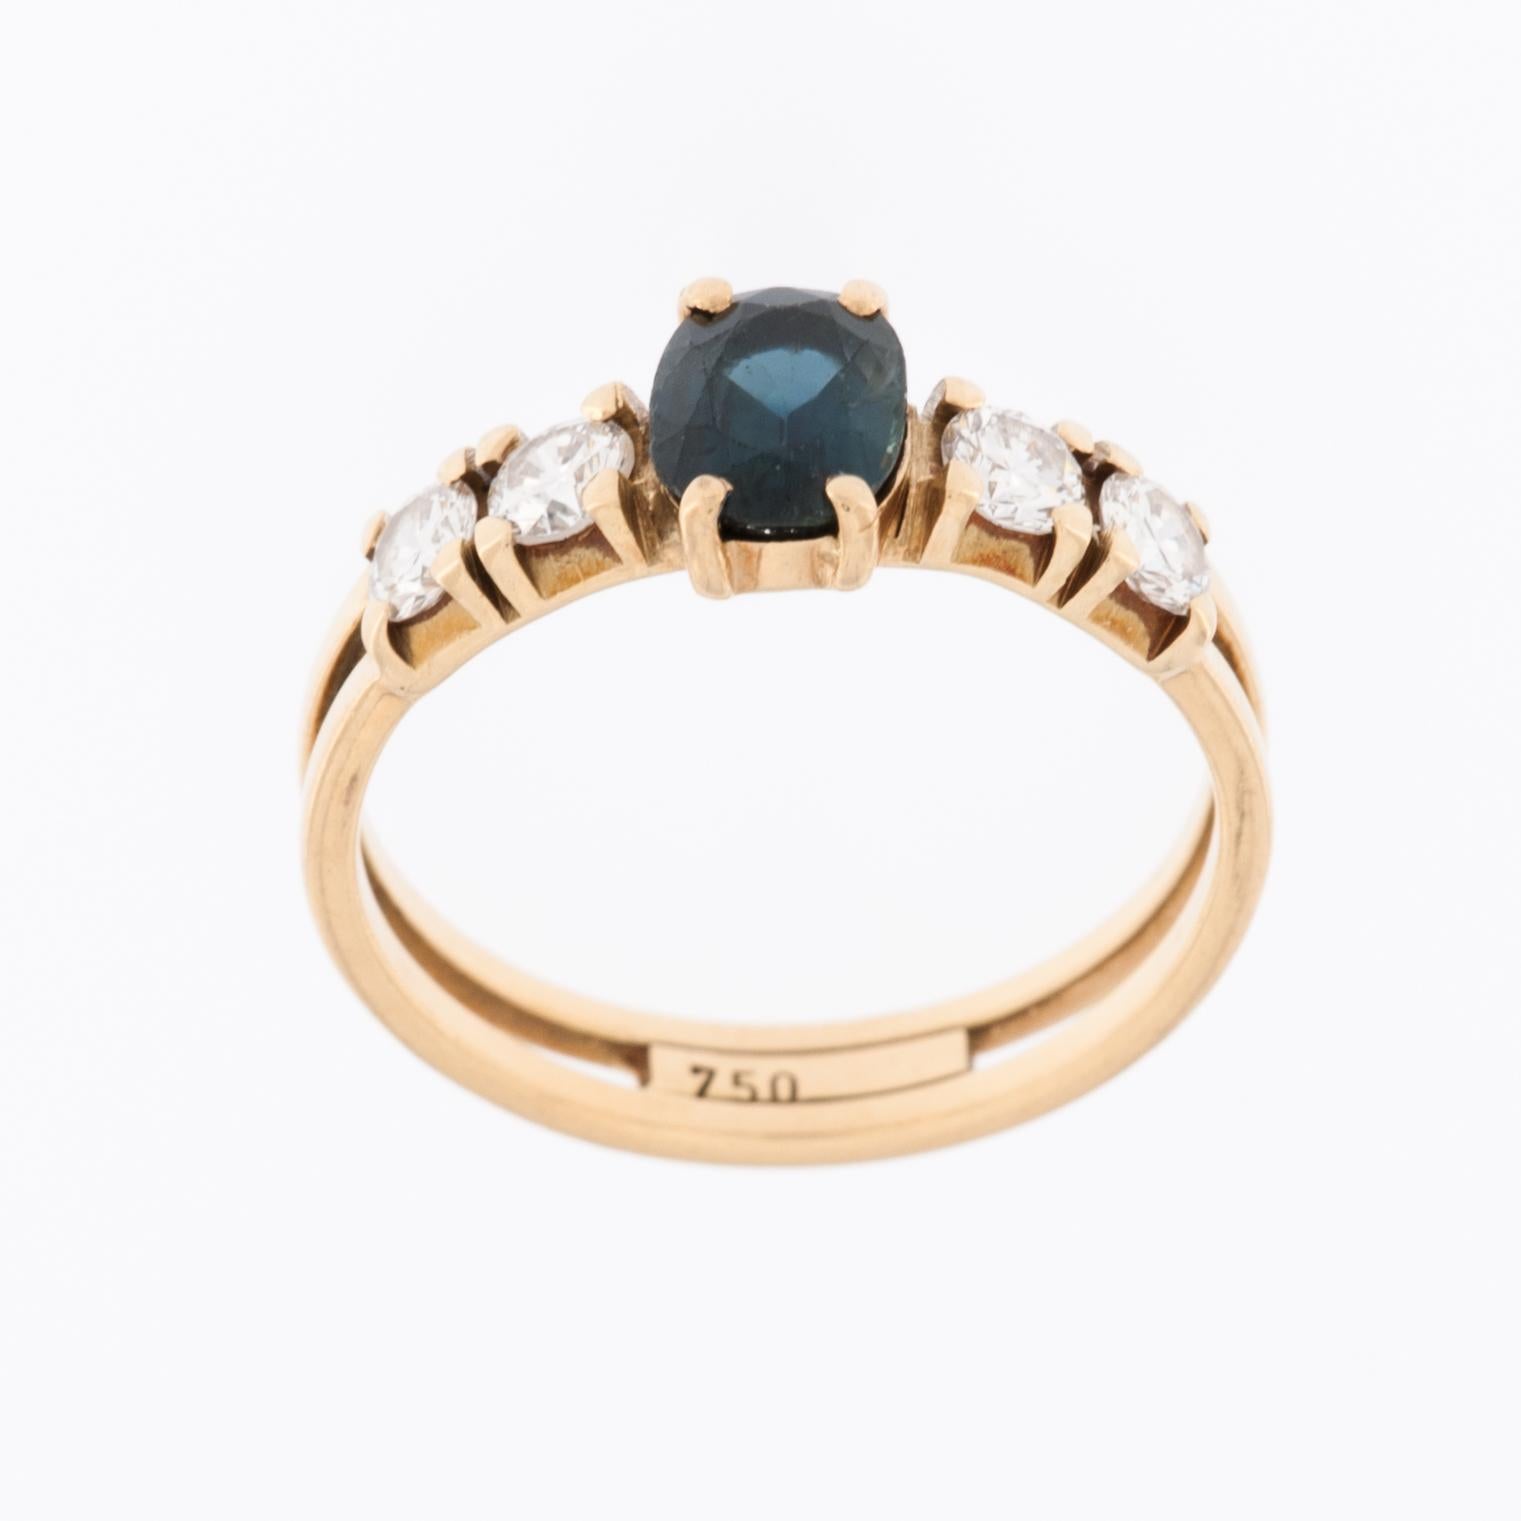 This classic Belgian ring is a timeless piece of jewelry crafted from lustrous 18kt yellow gold. The use of high-quality gold not only ensures a luxurious appearance but also provides durability and lasting beauty. The ring is adorned with both